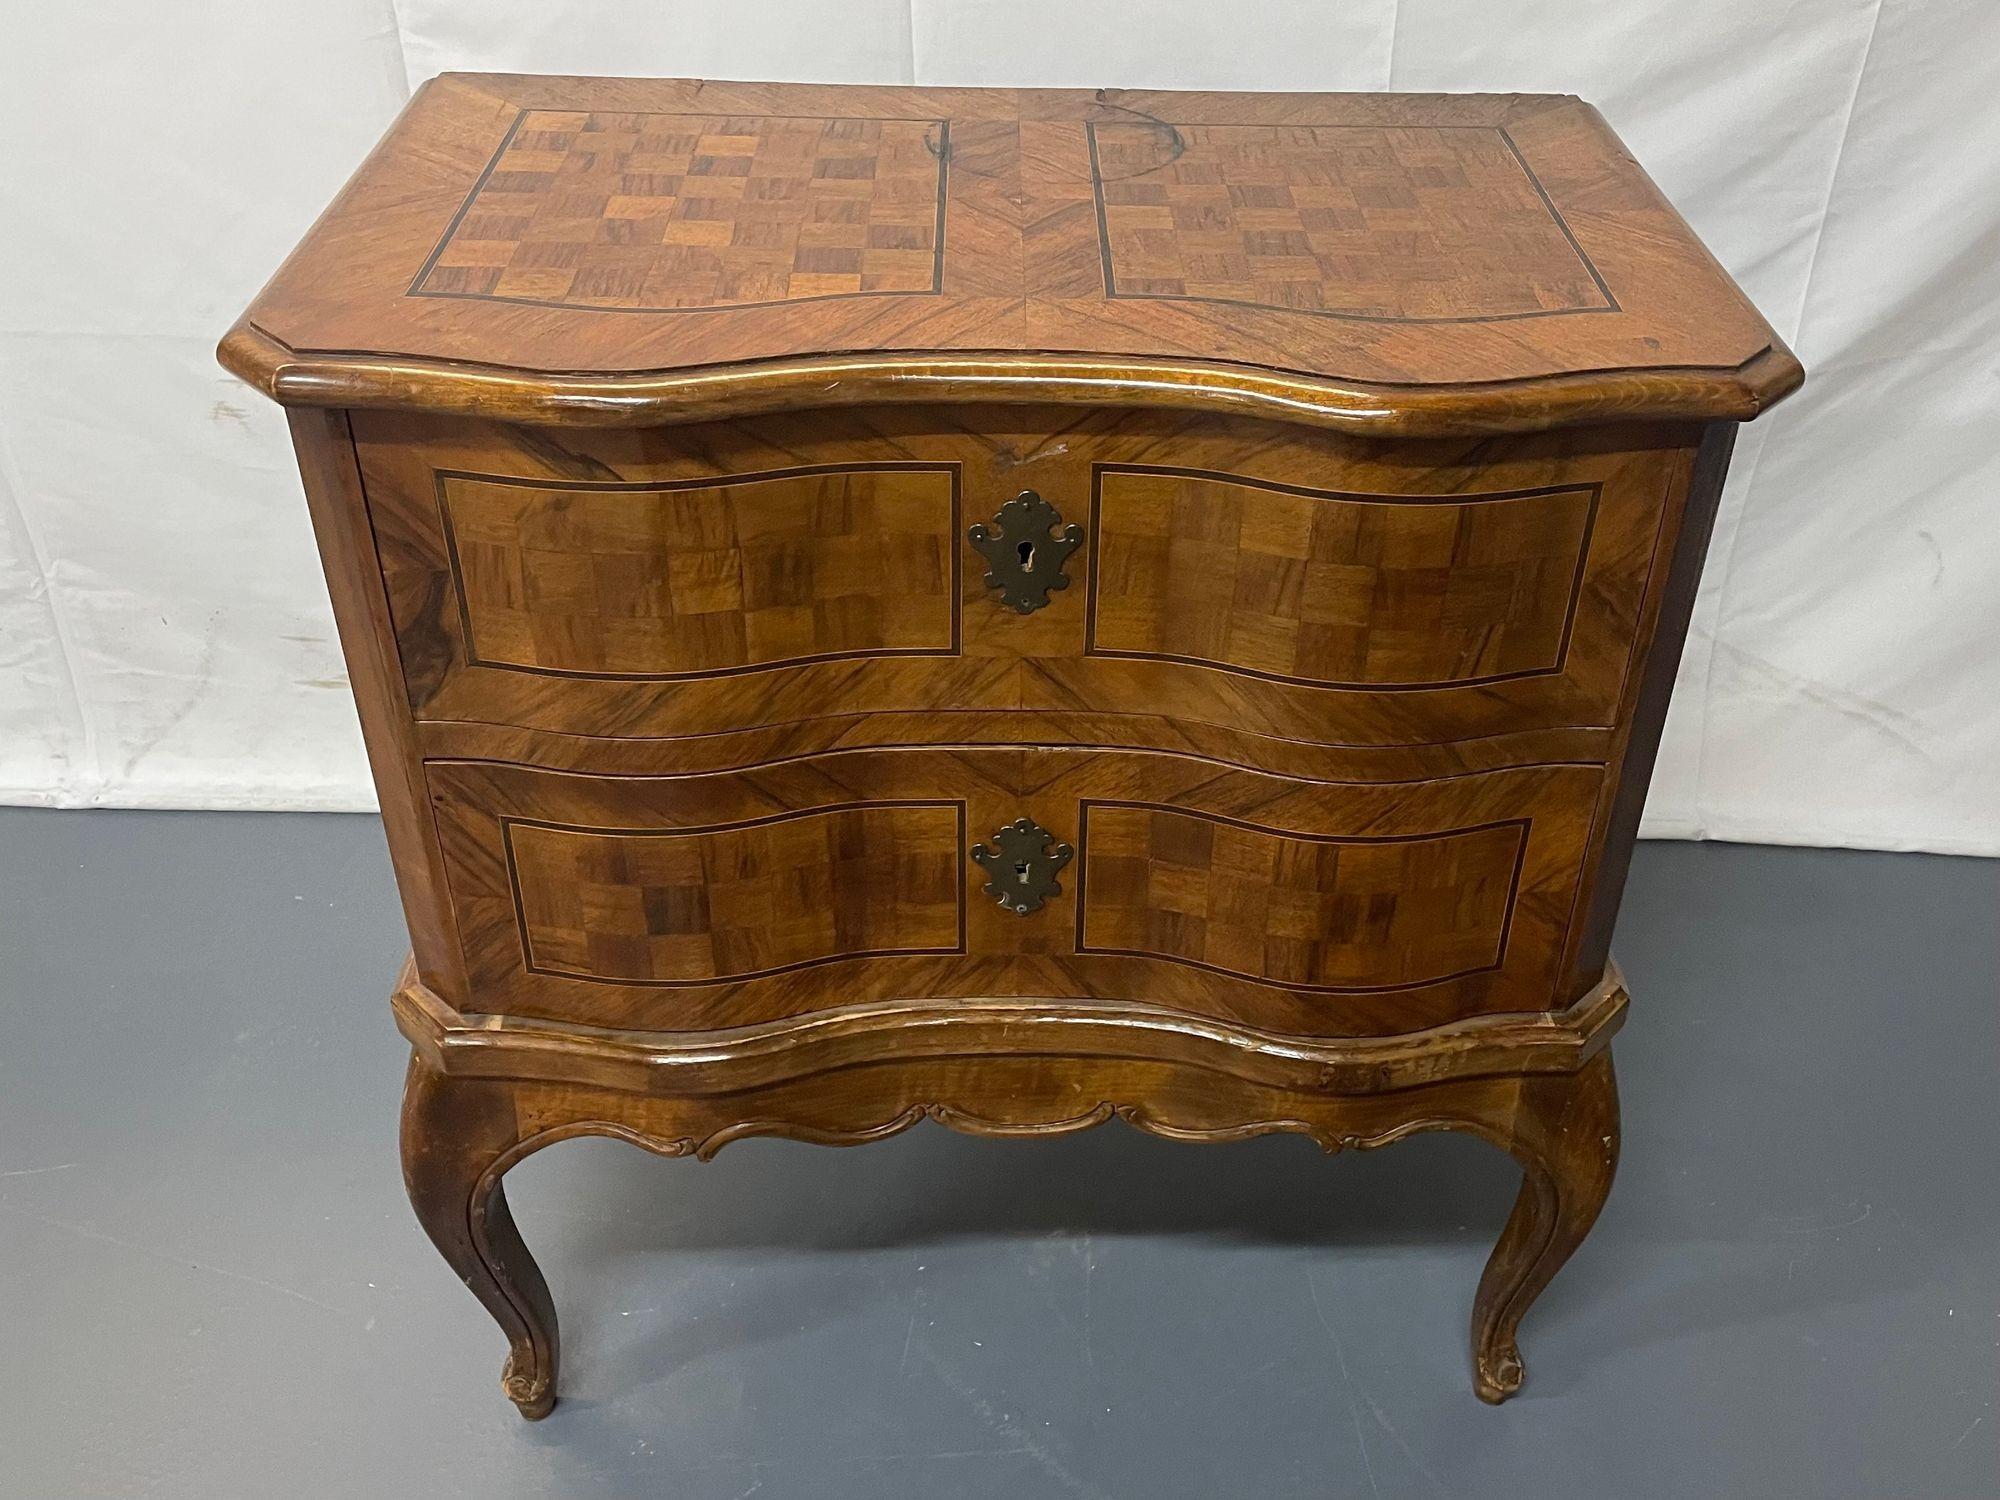 Italian Continental 19th c. two drawer chest, commode, nightstand, parquetry.
 
An Italian Continental 19th century two drawer chest, commode or night table. The case front is characterized by an elegant serpentine contouring and both front an top